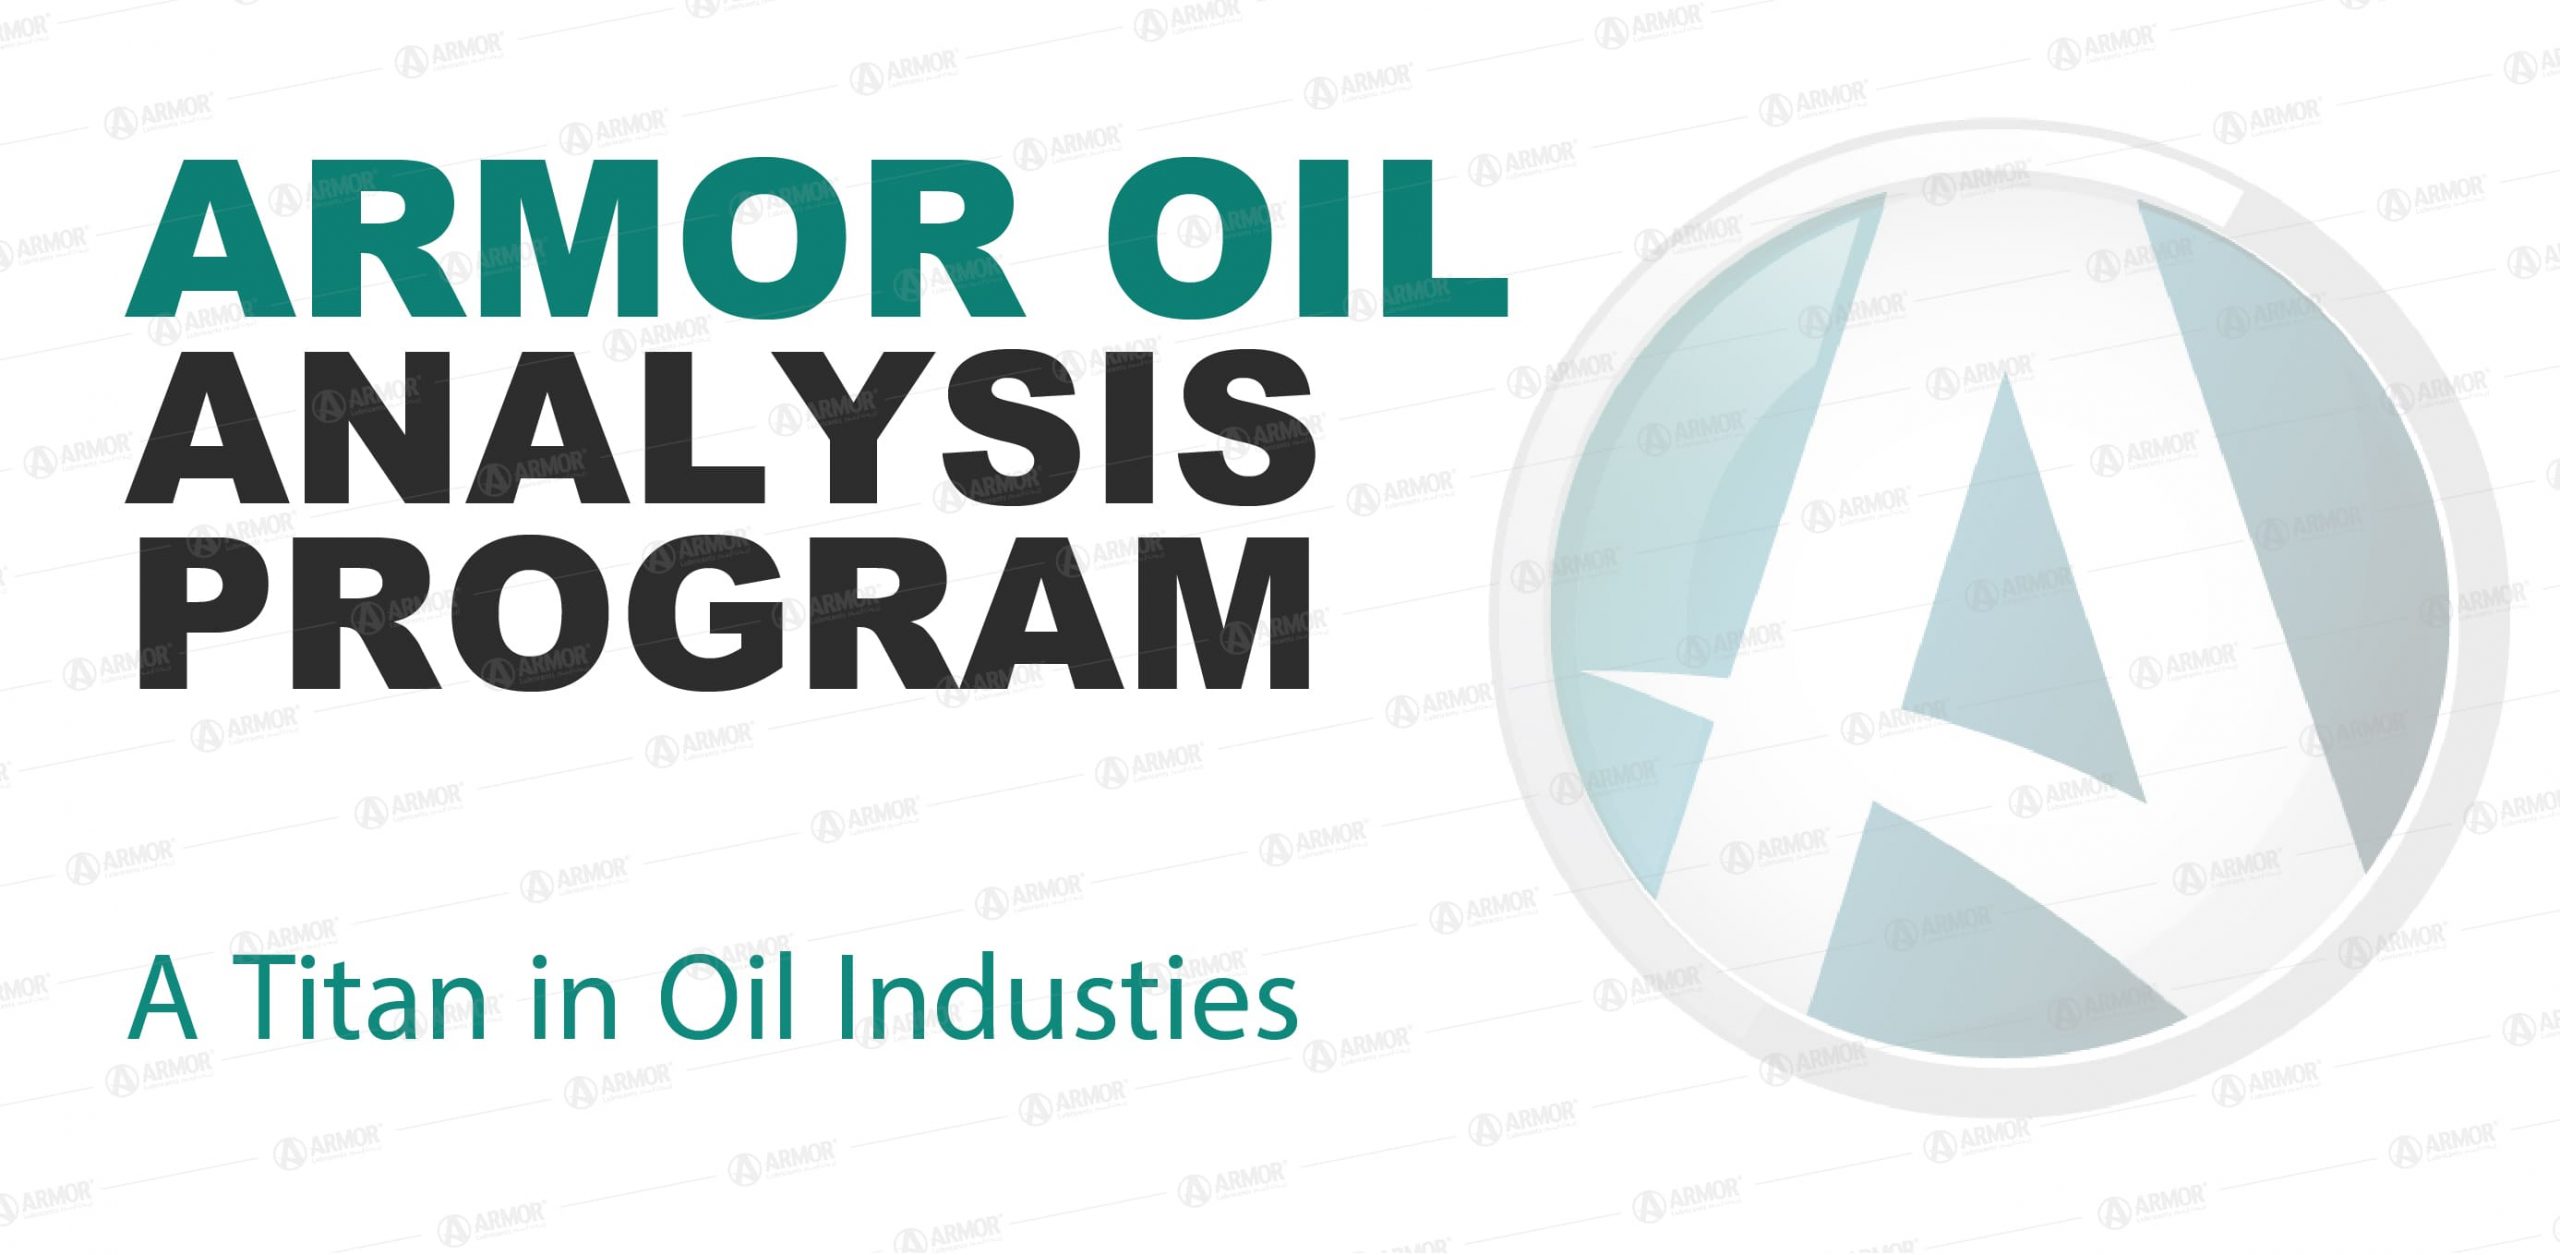 A titan in oil industry - Armor UAE Lubricant Manufacturers